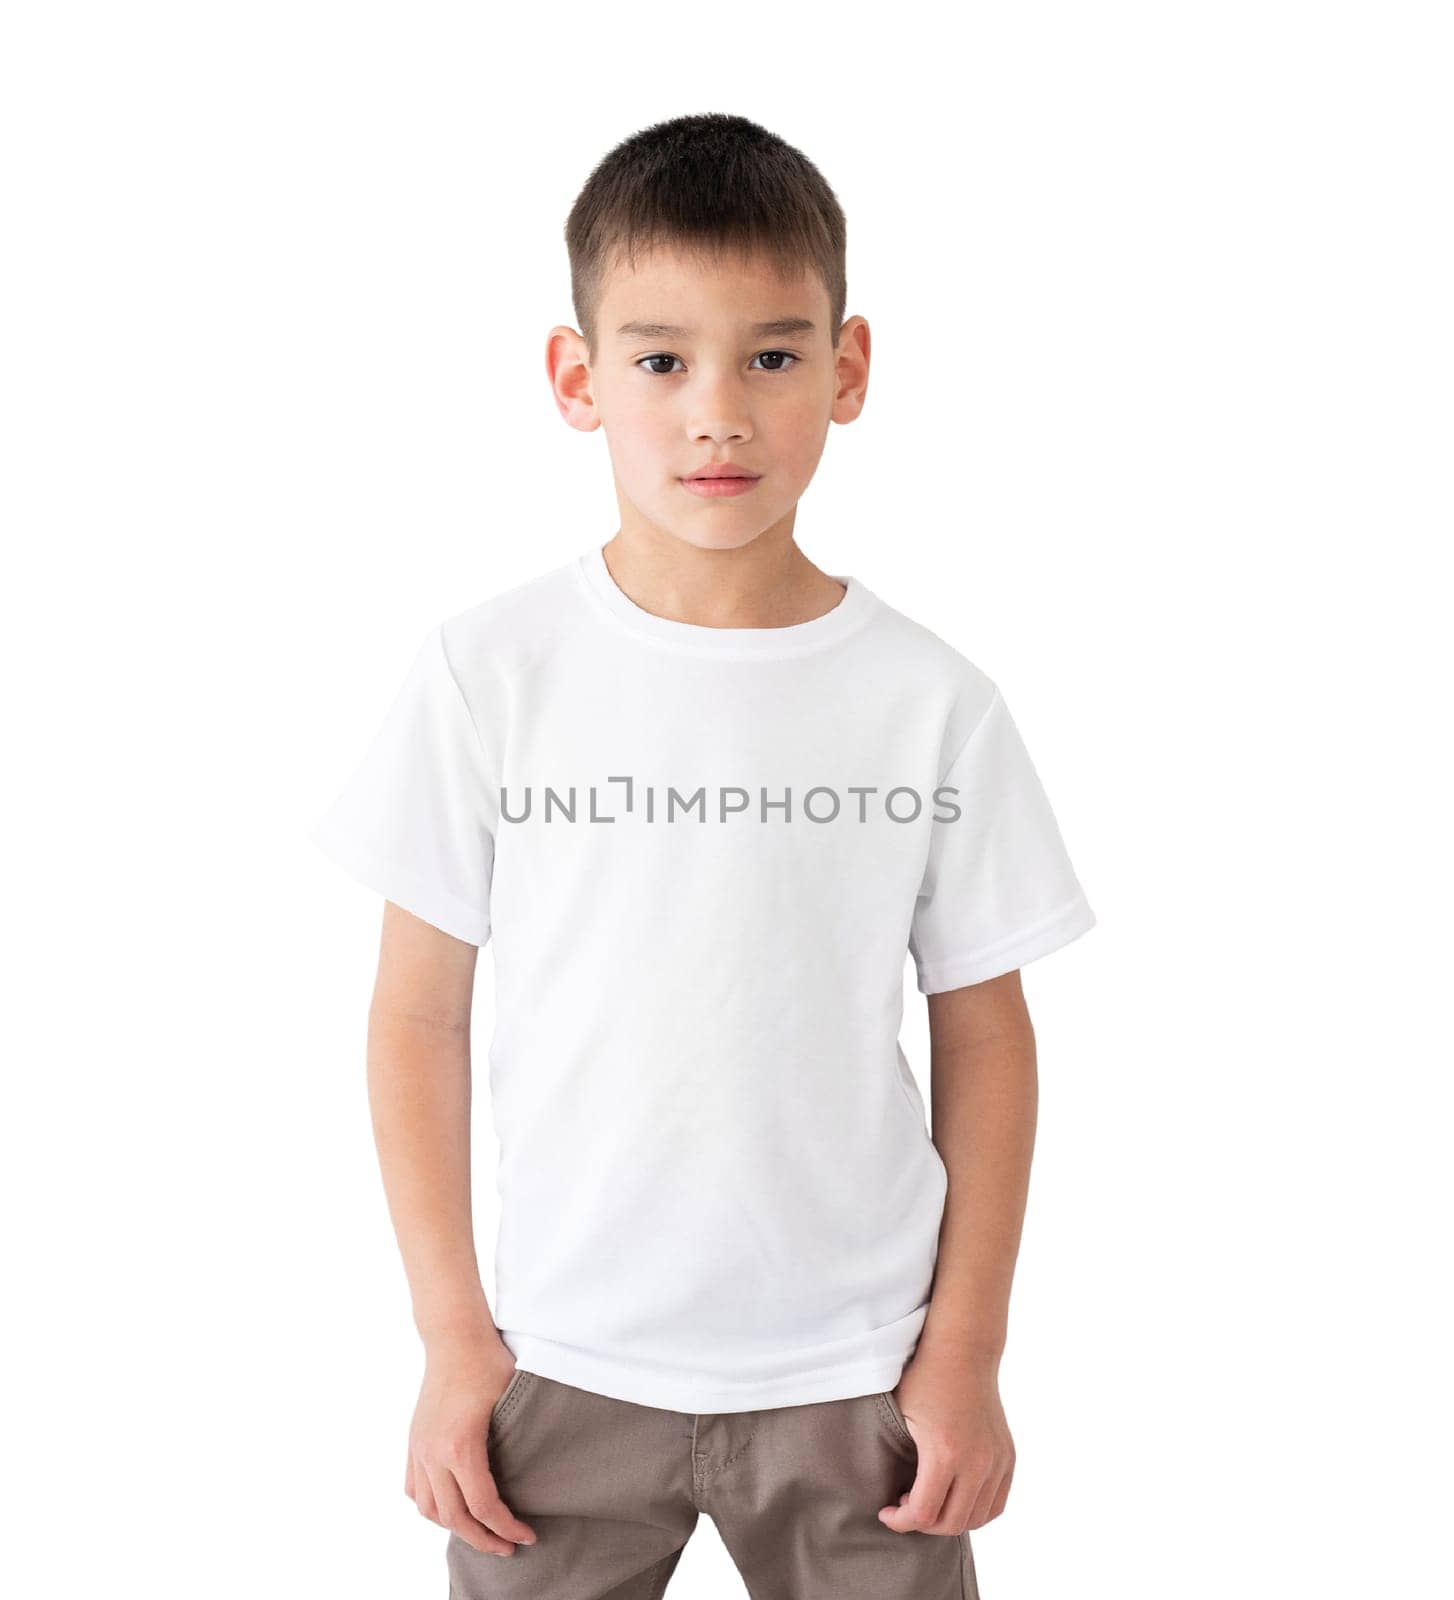 T shirt mock up. Cute little boy in blank white t-shirt isolated on a white background.